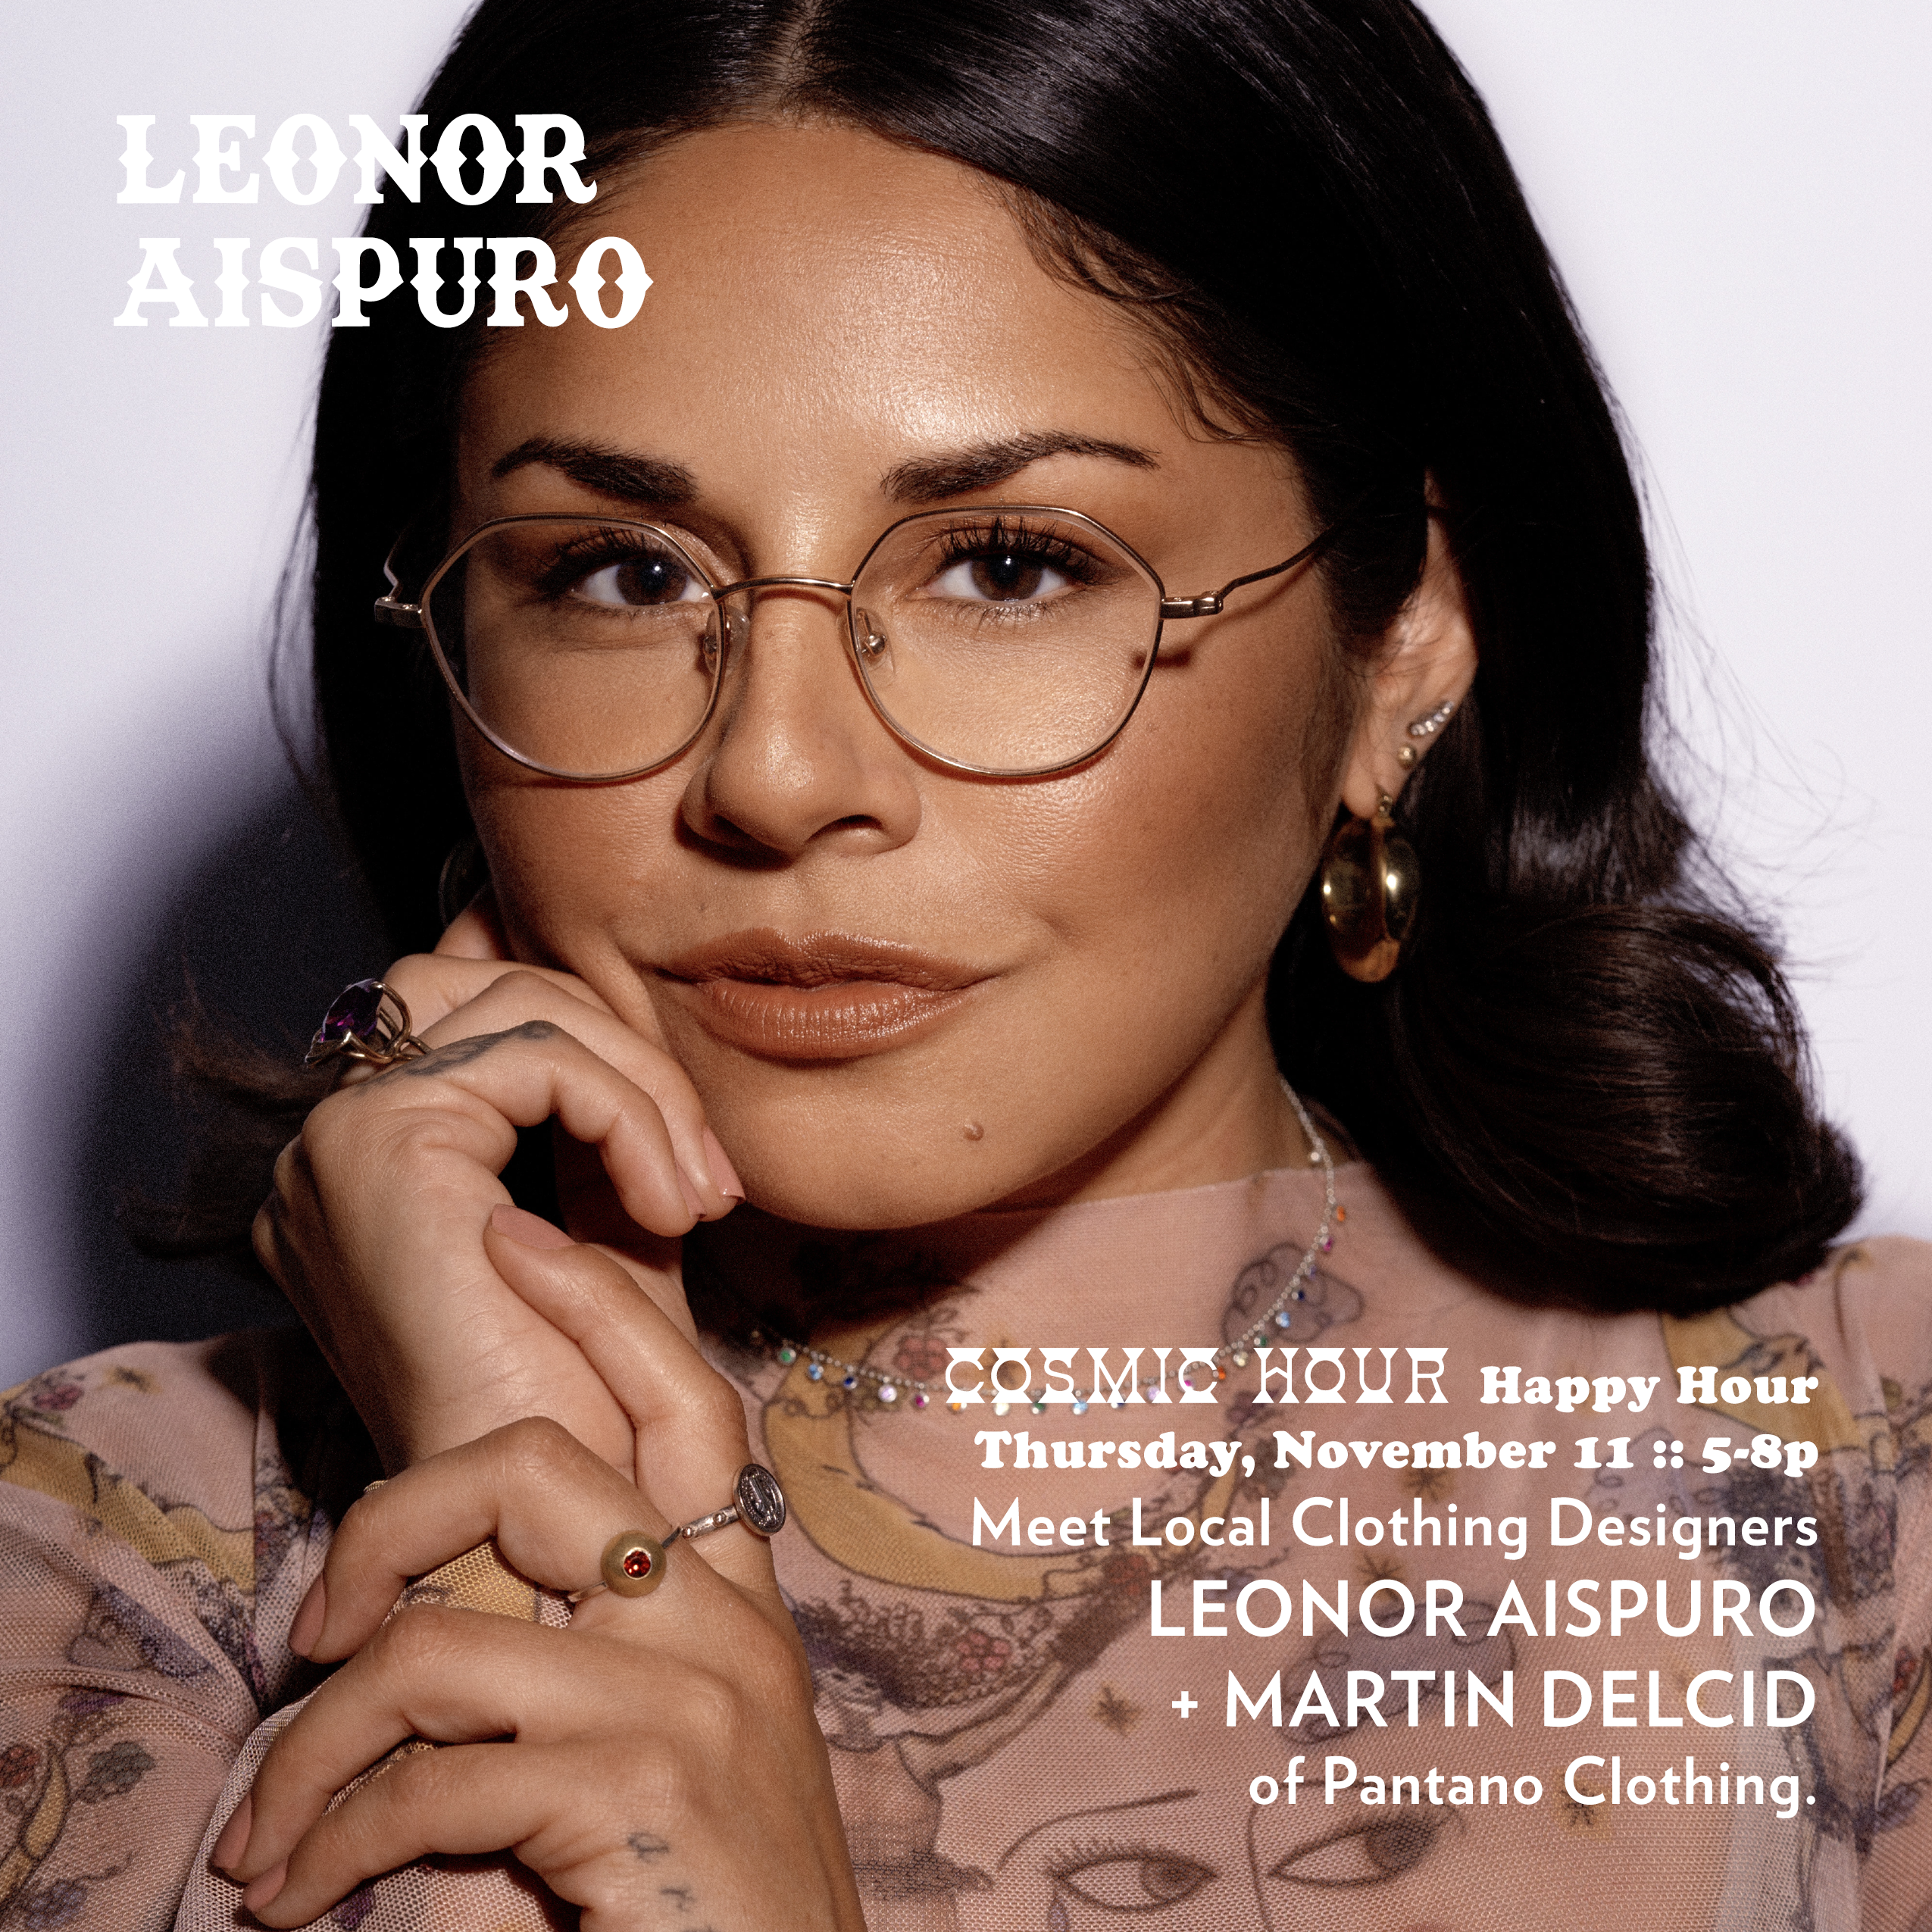 COSMIC HOUR Happy Hour | LEONOR AISPURO is making the world a better place one garment at a time.